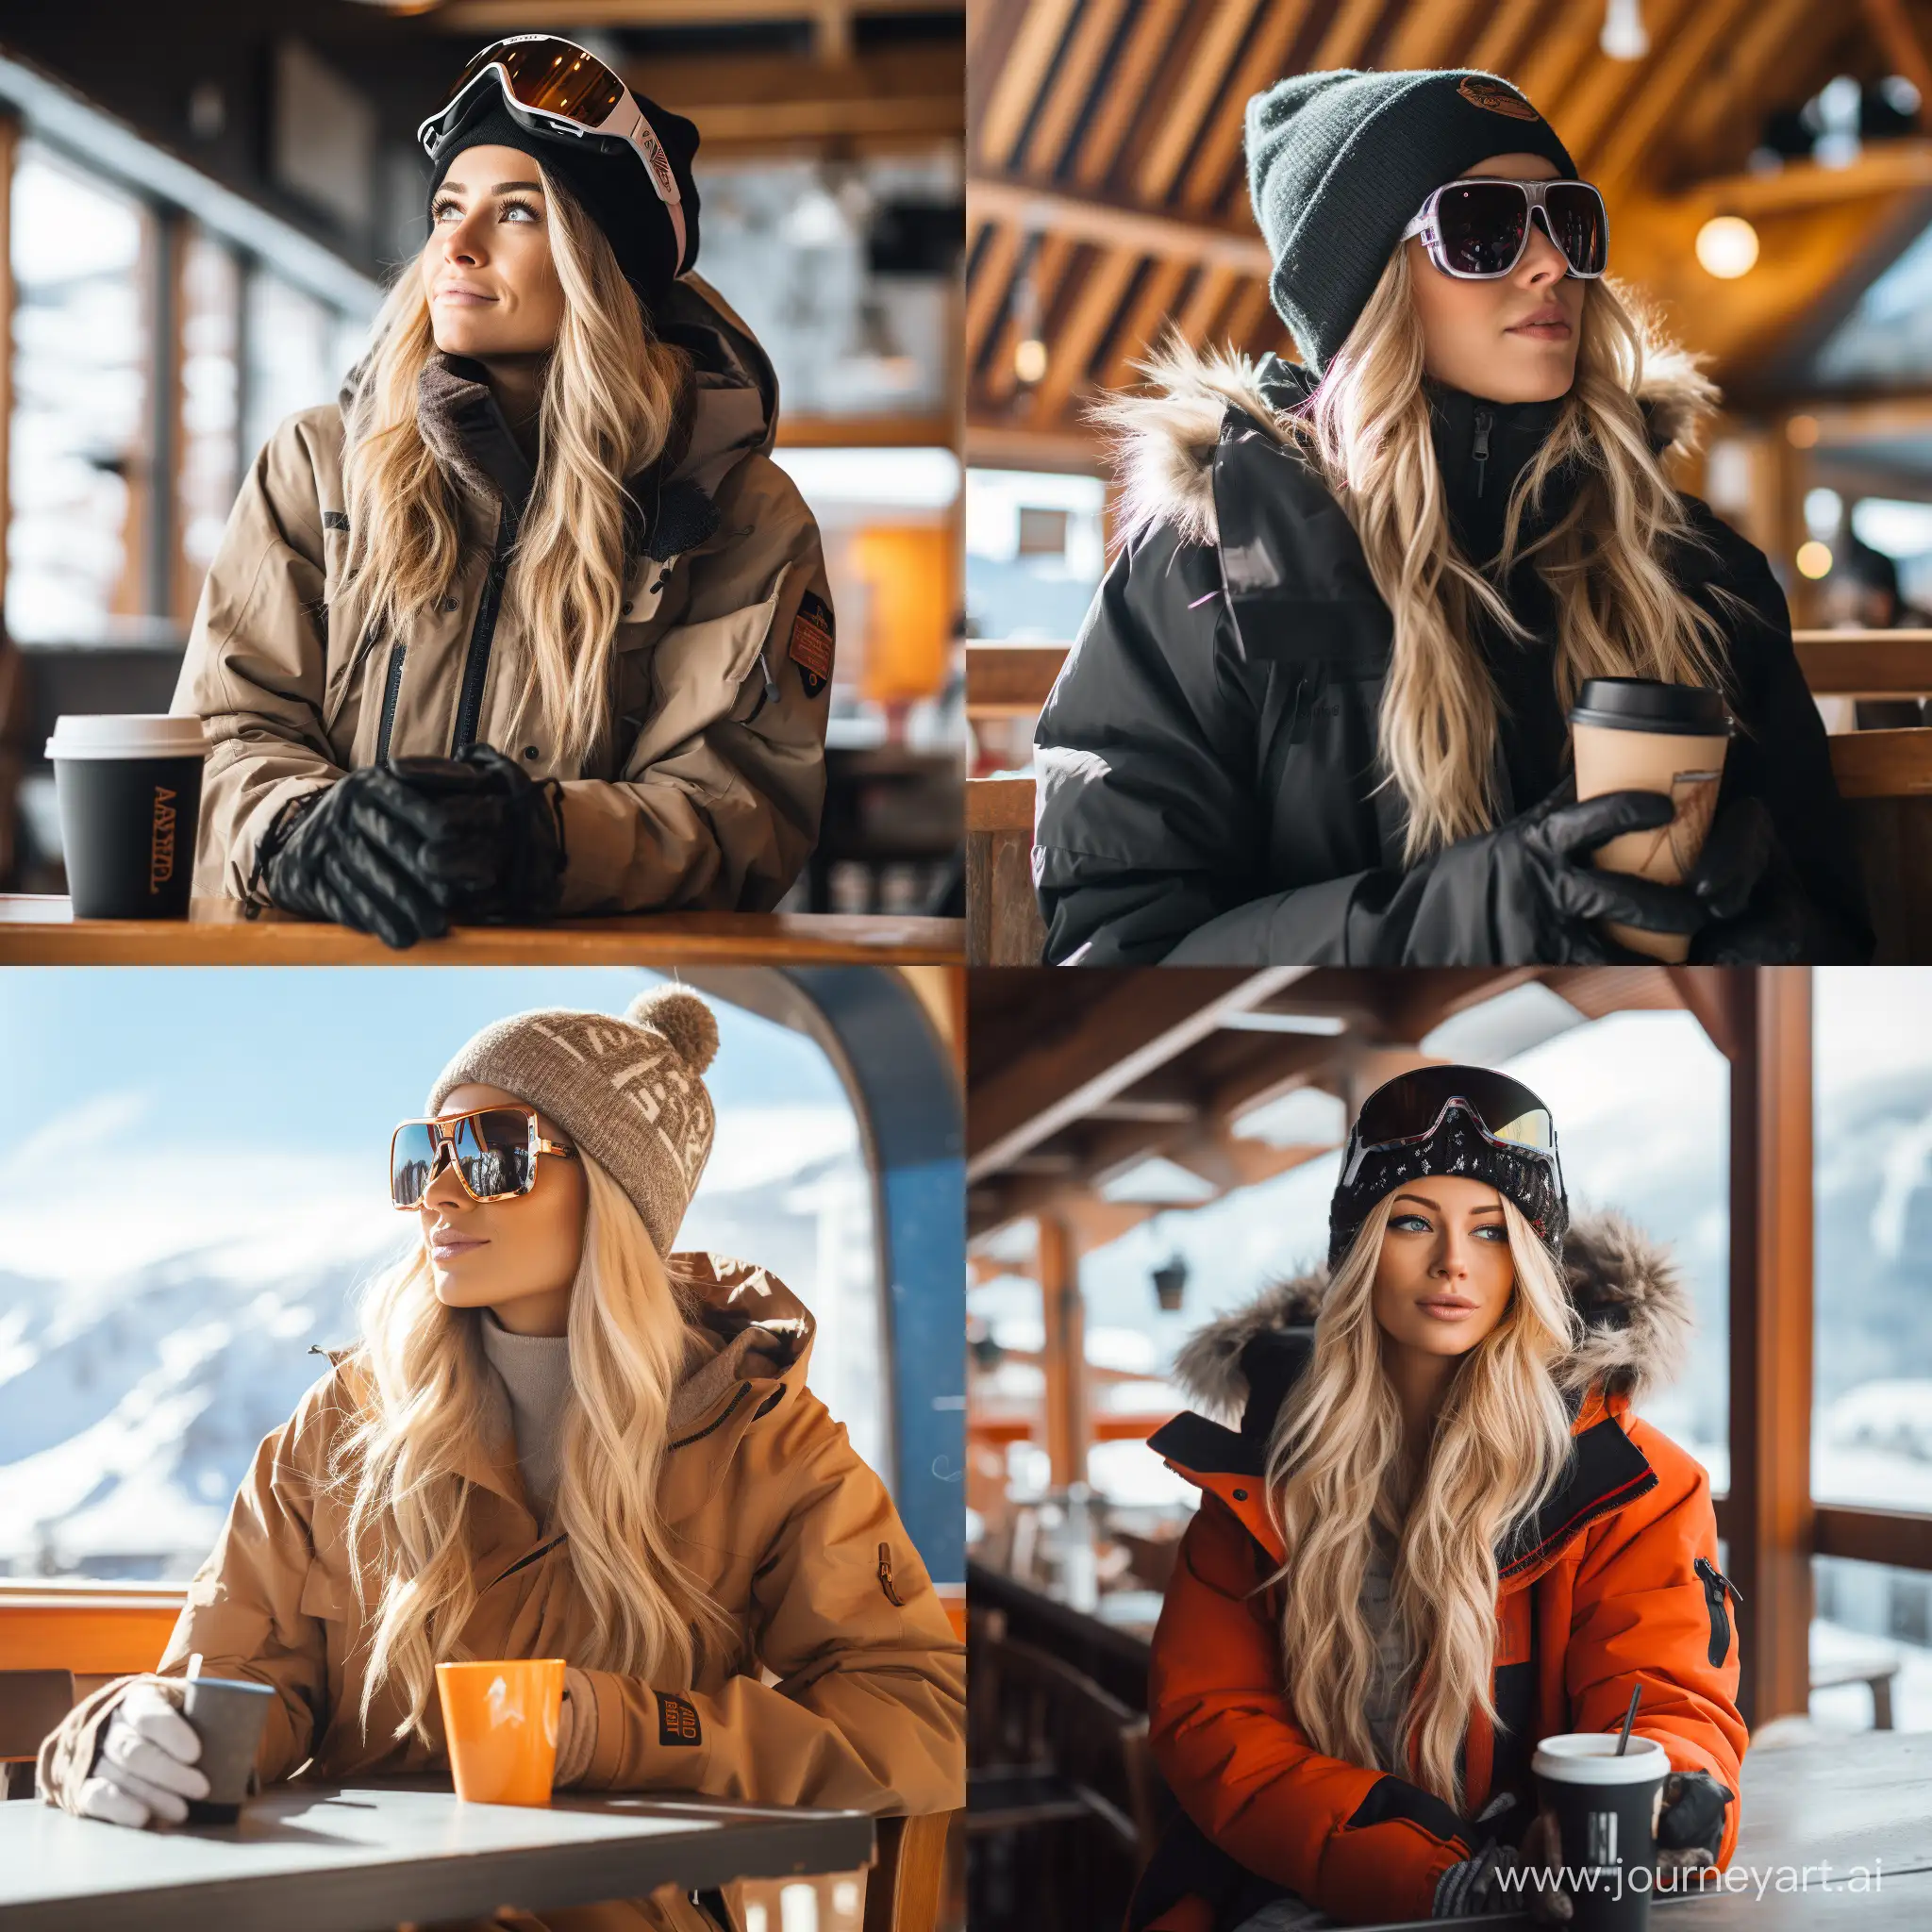 photo in realistic style: a girl - snowboarder drinking coffee against the background of ski resort. — commercial photography — magazine photography — glamour photography ar 16:9